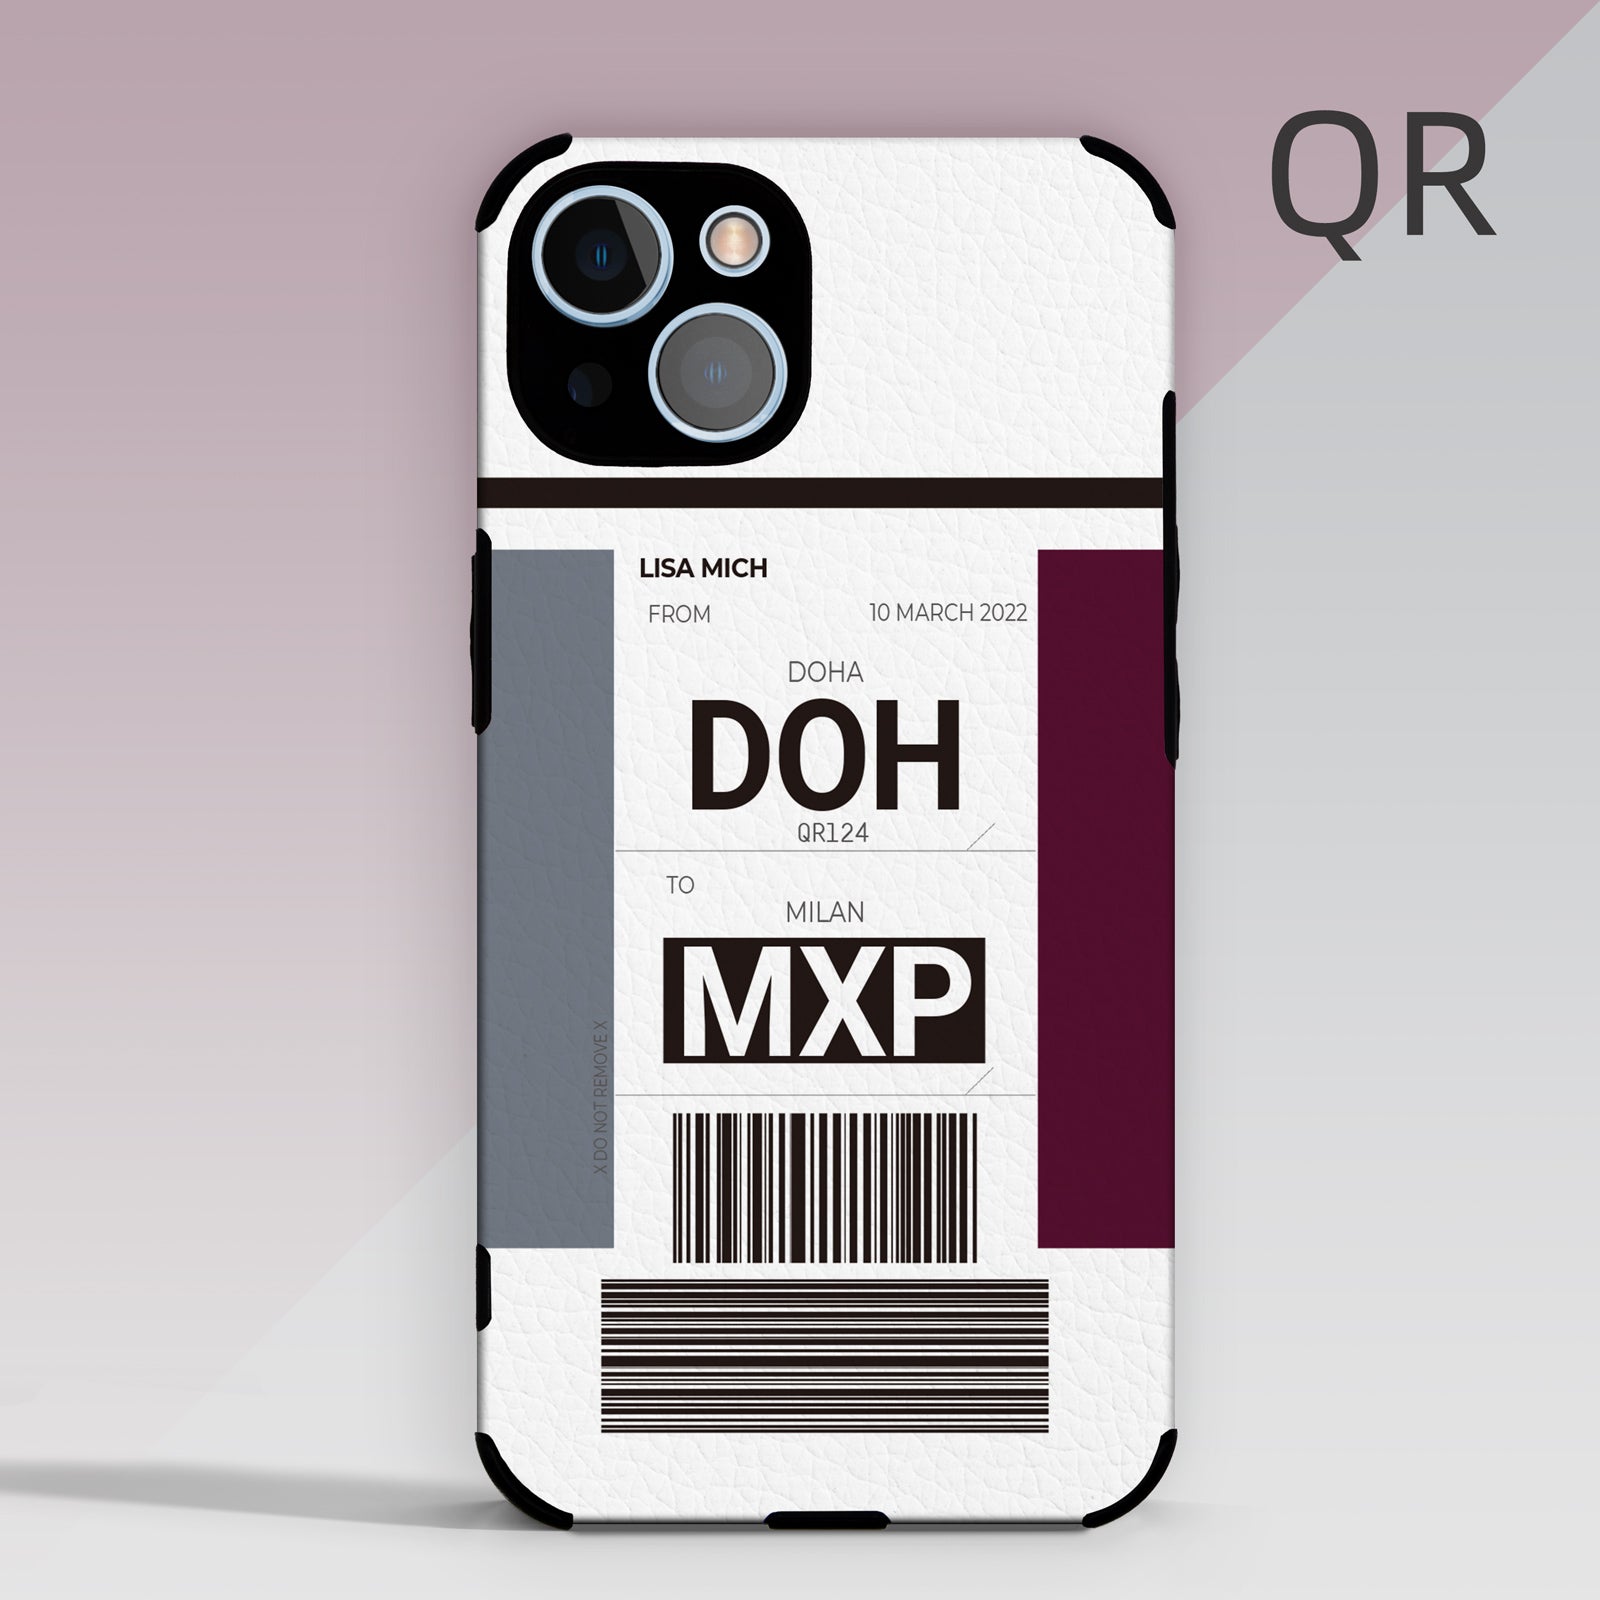 Qatar Airways Plane Baggage Ticket phone case. The best aviation phone case for pilot, crew, travel and aviation lover. Perfect gift for aviation geeks, frequent flyers, and travel lovers. Apple iphone 13 12 11 pro max se xs huawei samsung xiaomi.